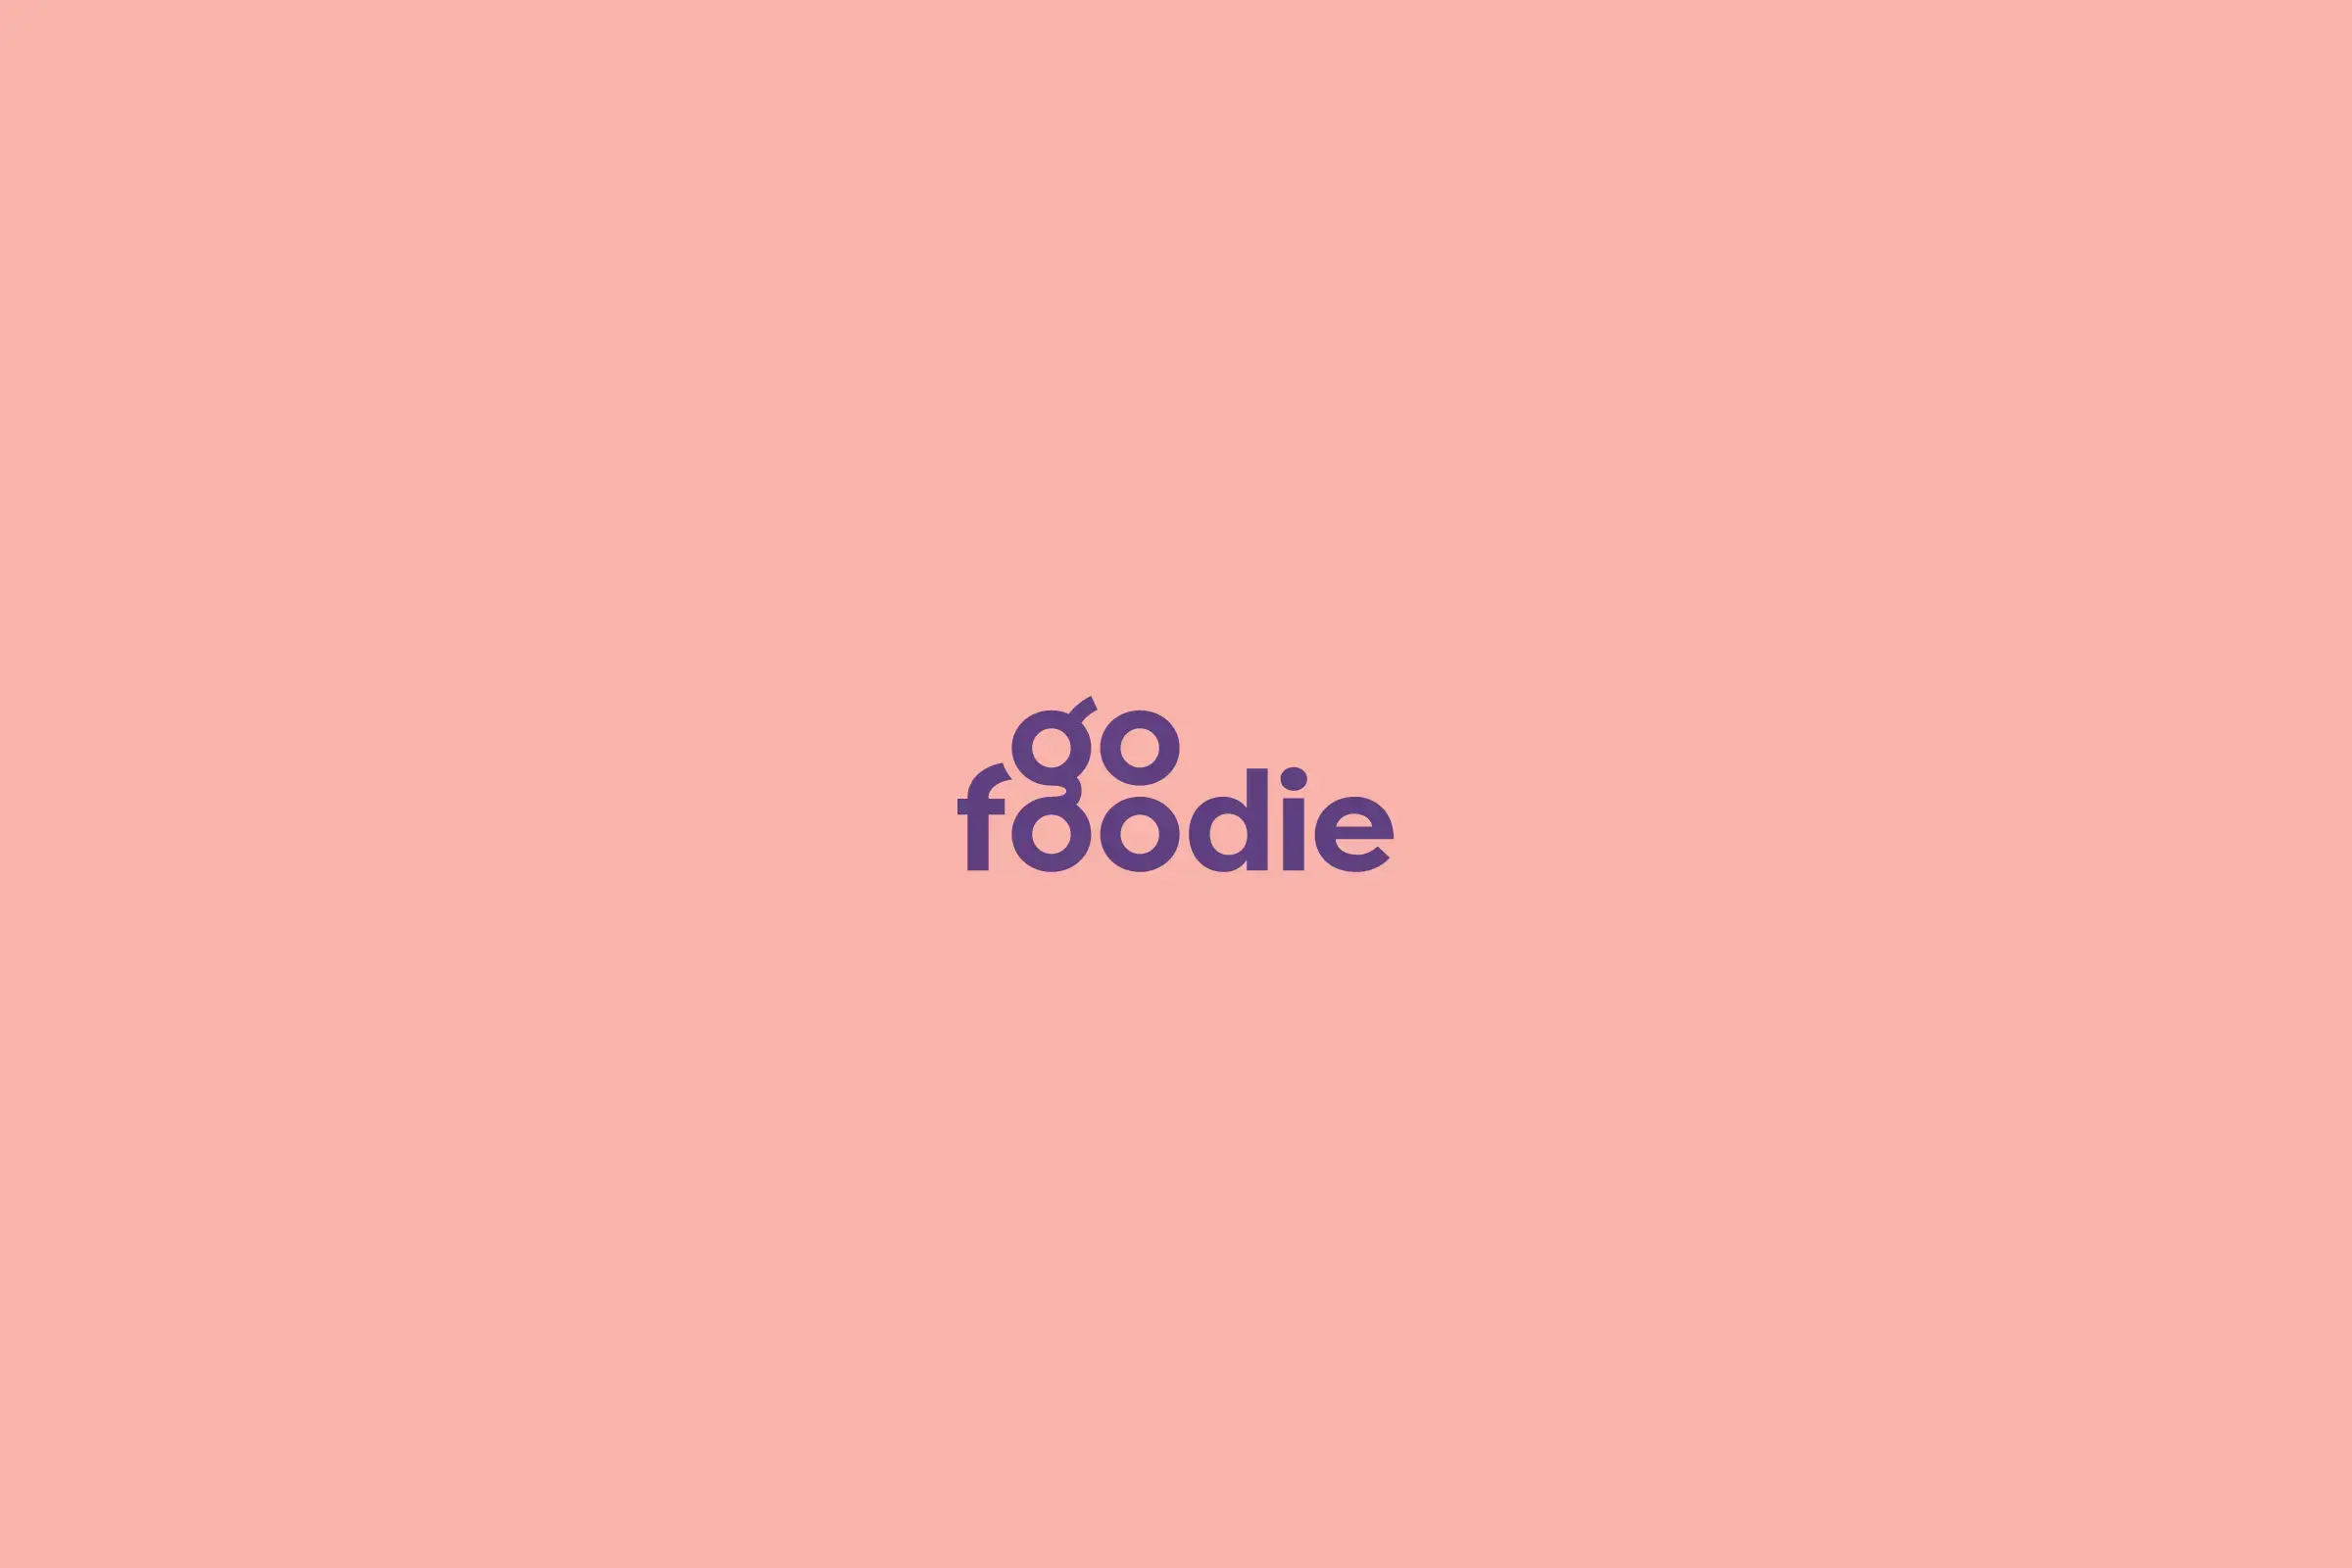 GoFoodie brand identity - Logo - Graphic Design -- Pink background with purple go foodie logo - visuals by Ten Fathoms